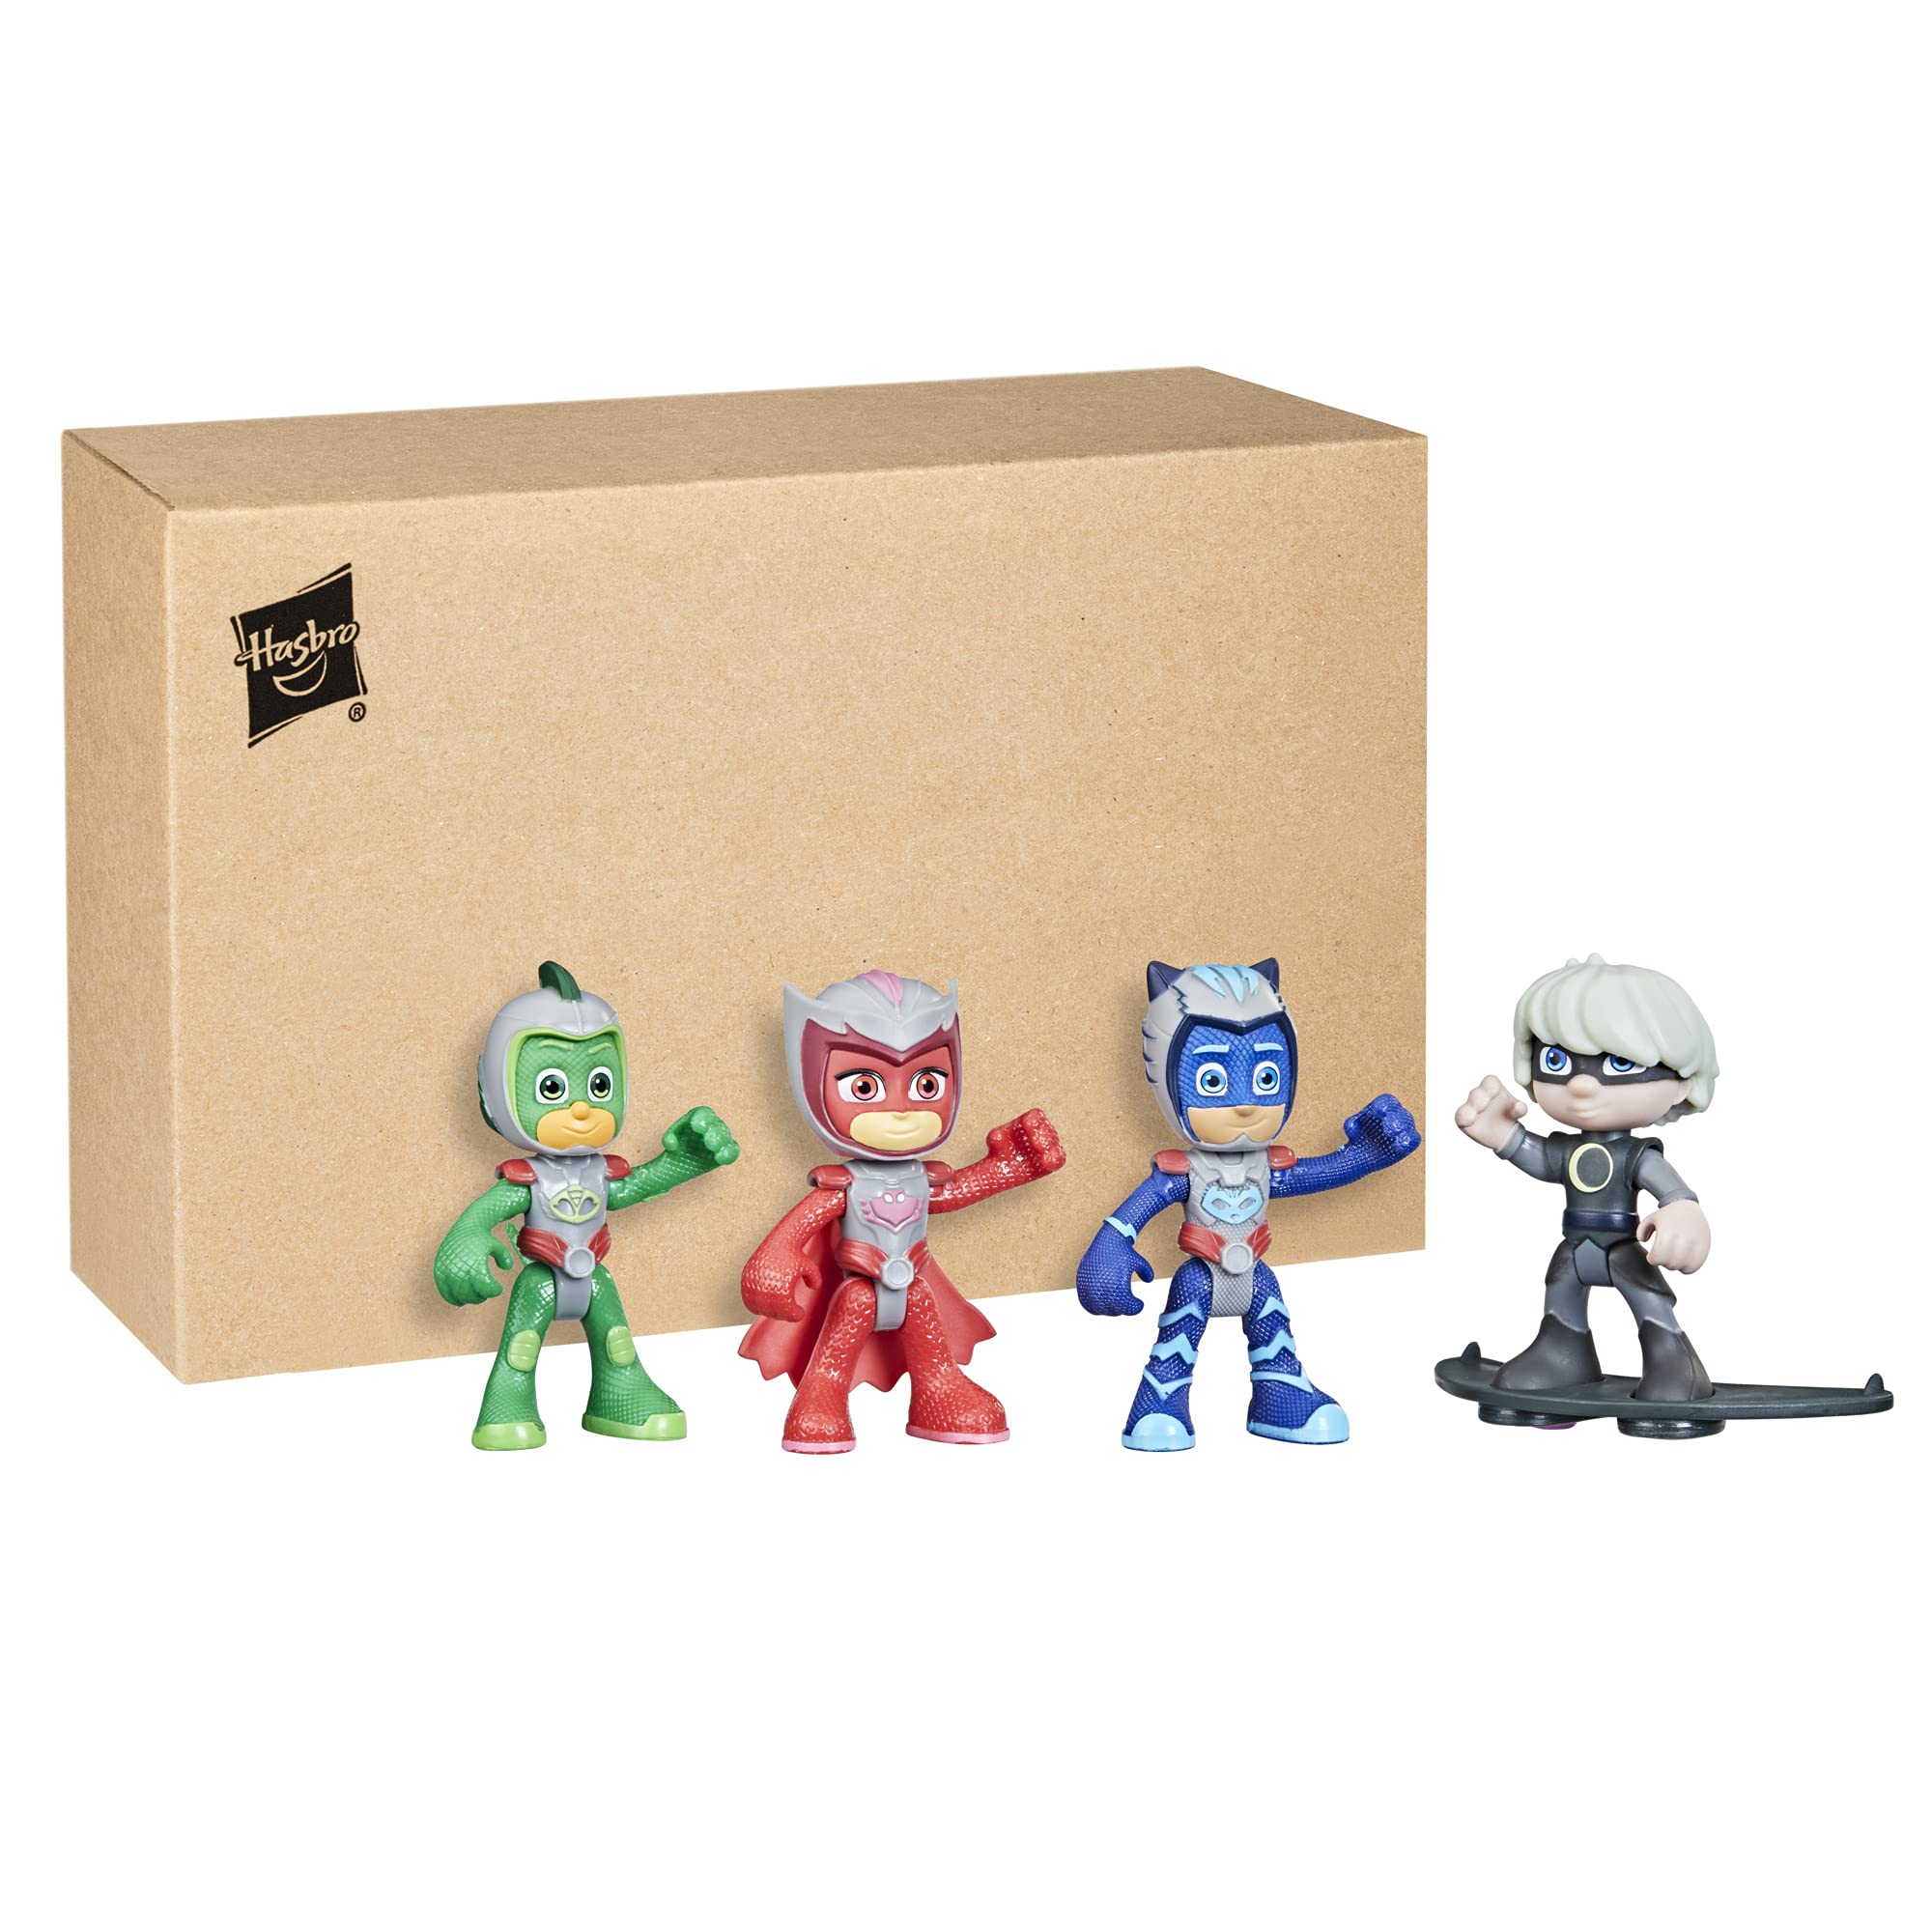 PJ Masks Flight Time Mission Action Figure Set, Preschool Toy for Kids Ages 3 and Up, Includes 4 Action Figures and 1 Accessory